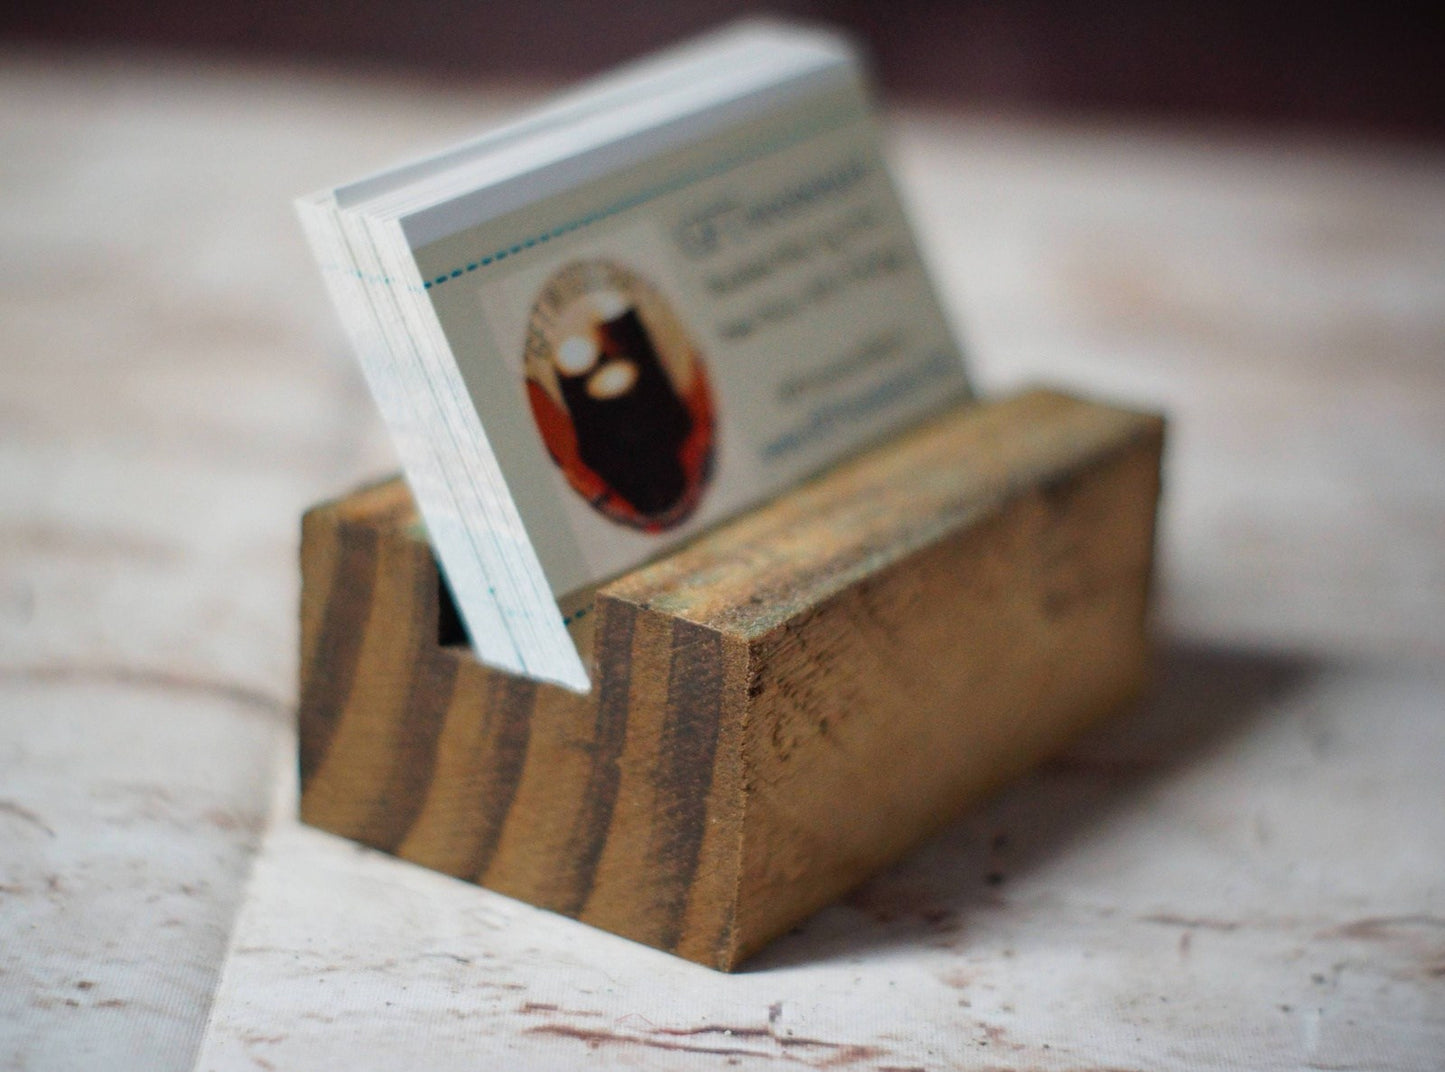 Business Card Holder, Business Gift, Coworker gift-Gifts-GFT Woodcraft